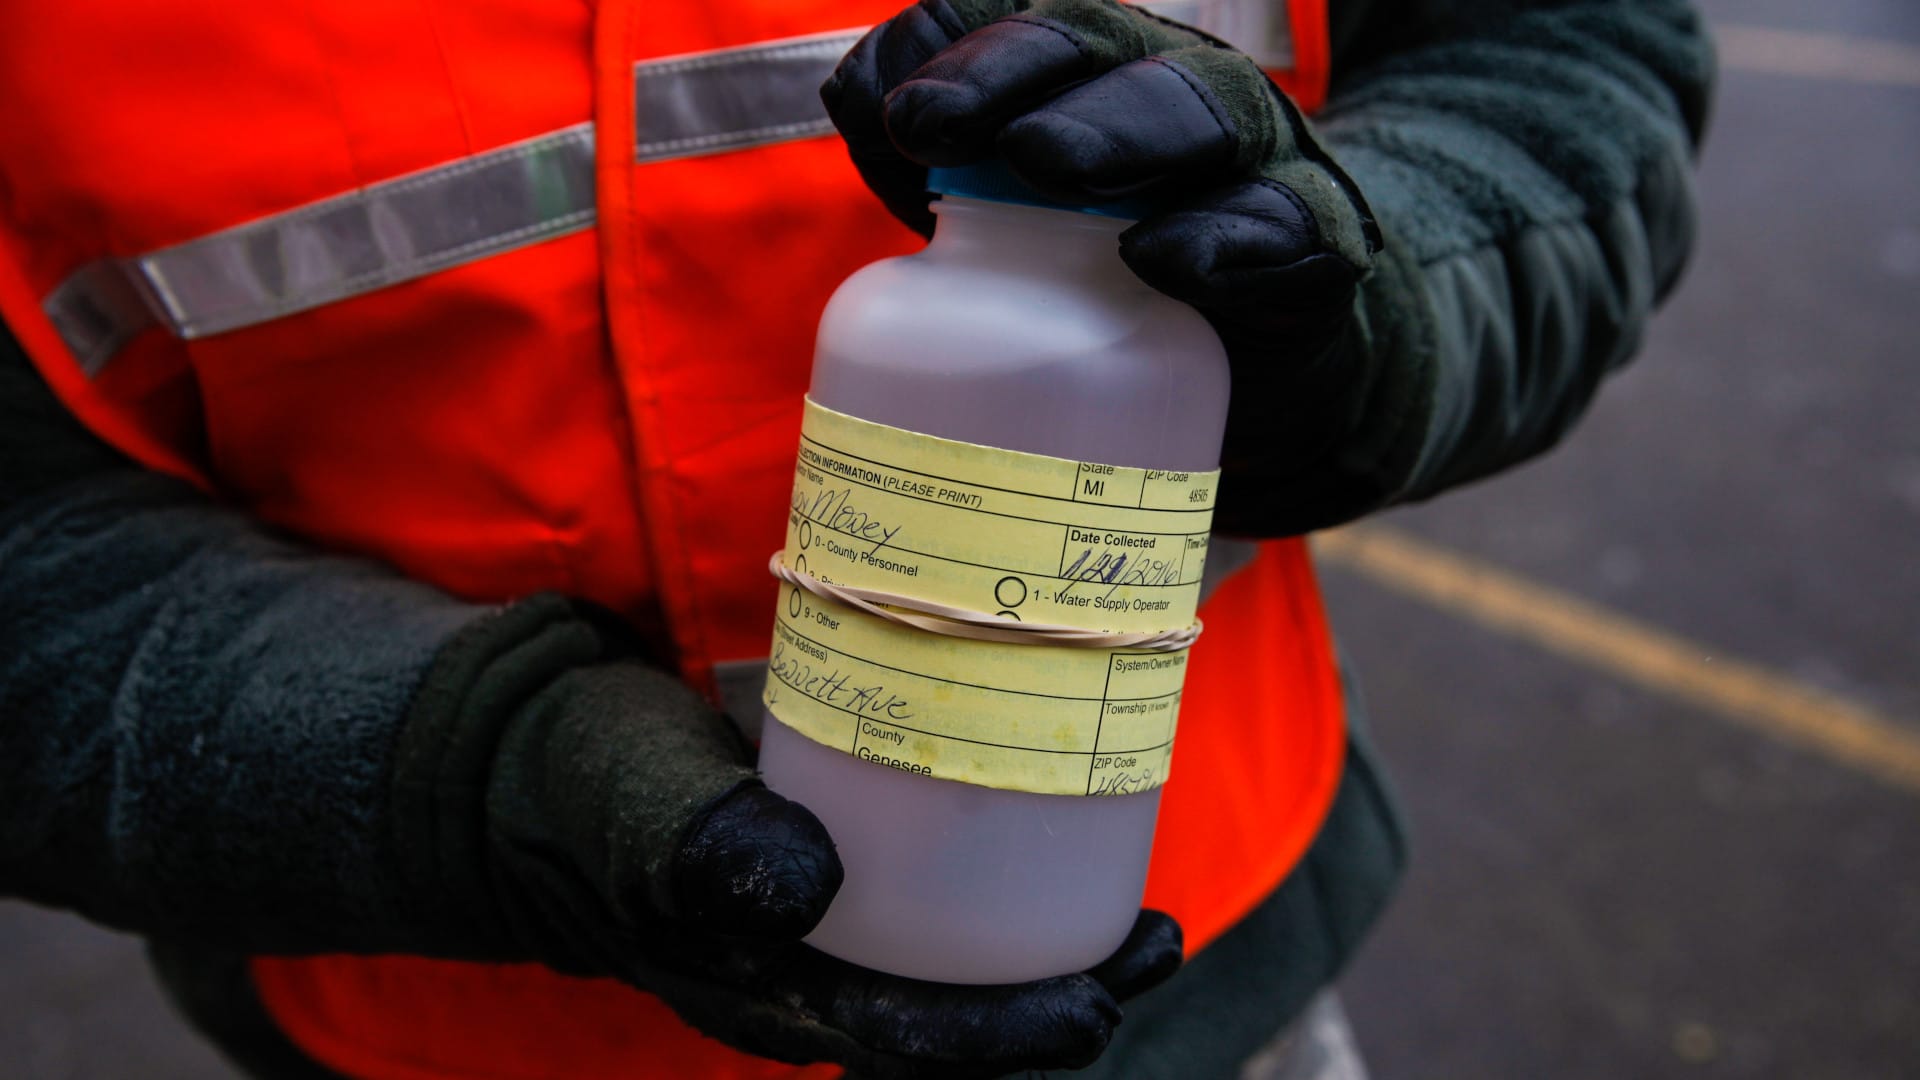 A water sample collected by the National Guard from Flint residents in January 2016.